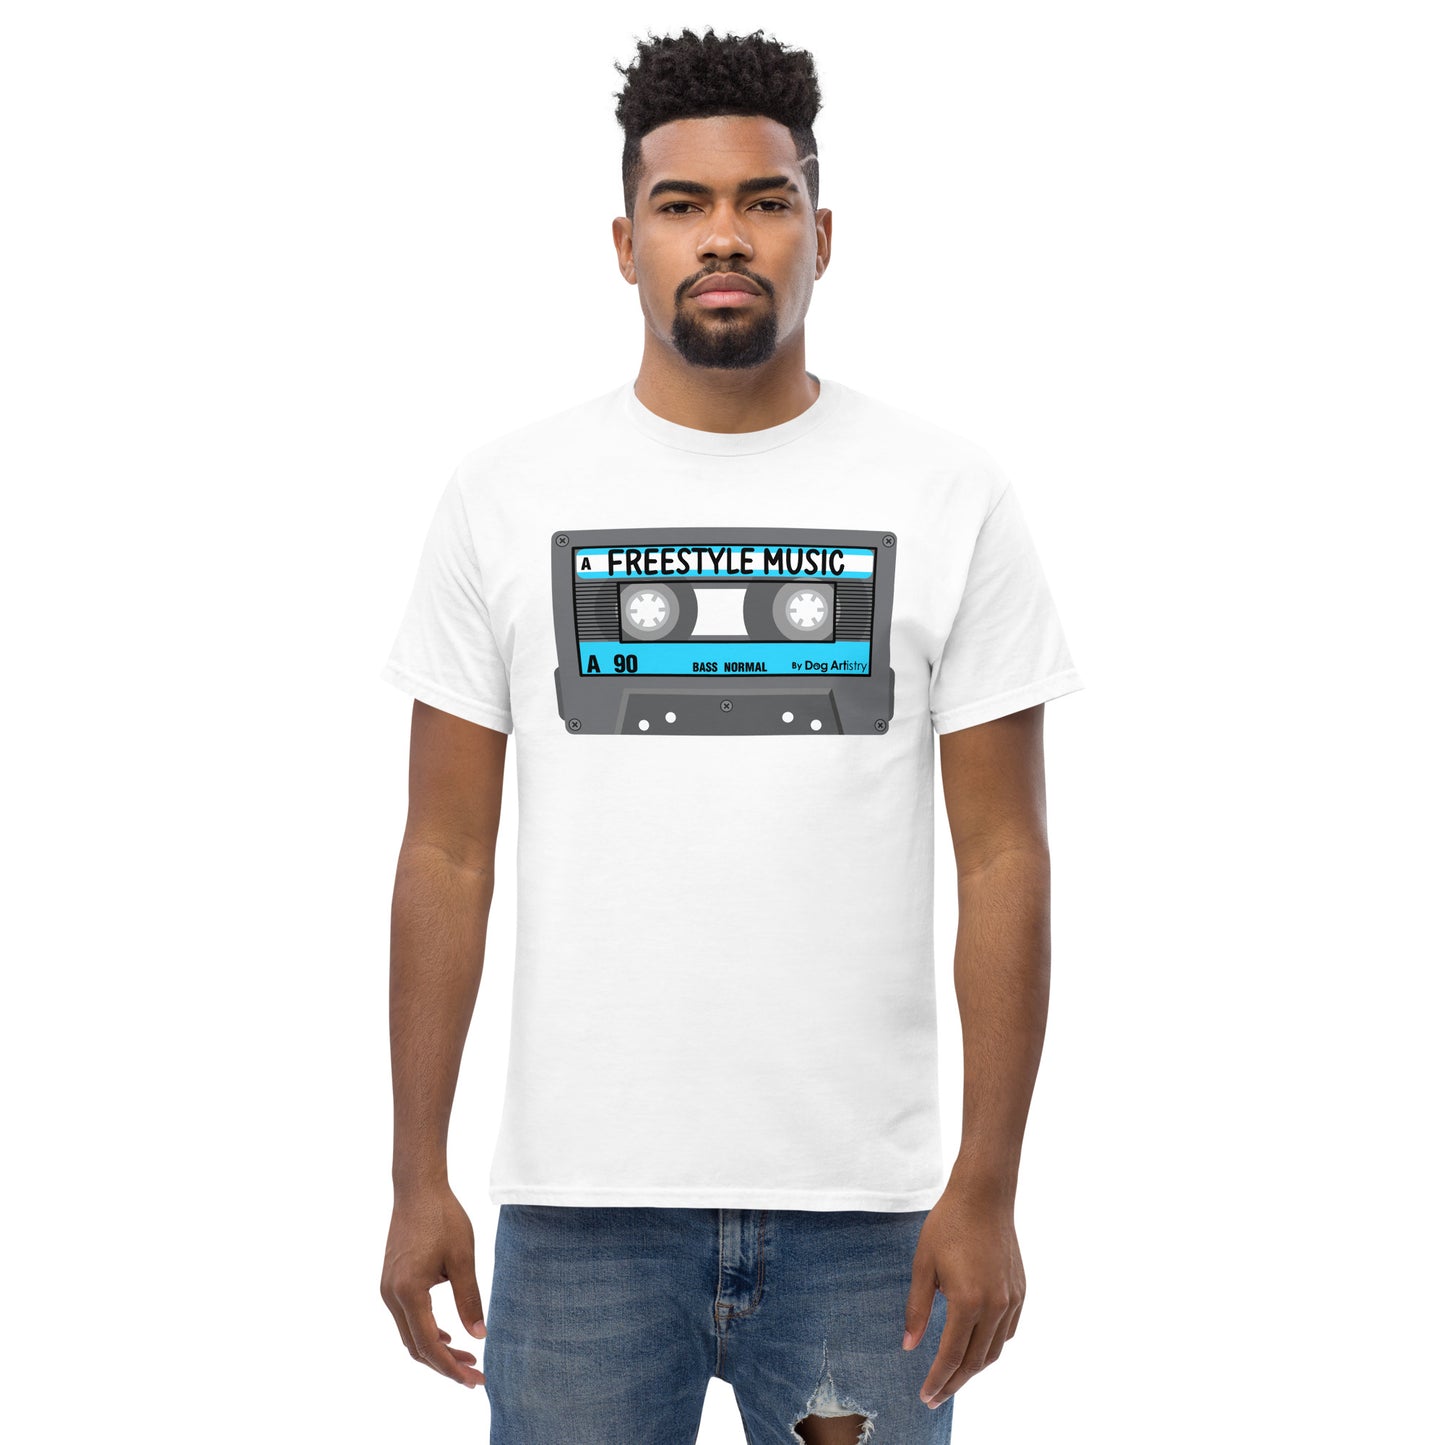 Freestyle Music Cassette Tape Men's classic tee by Dog Artistry